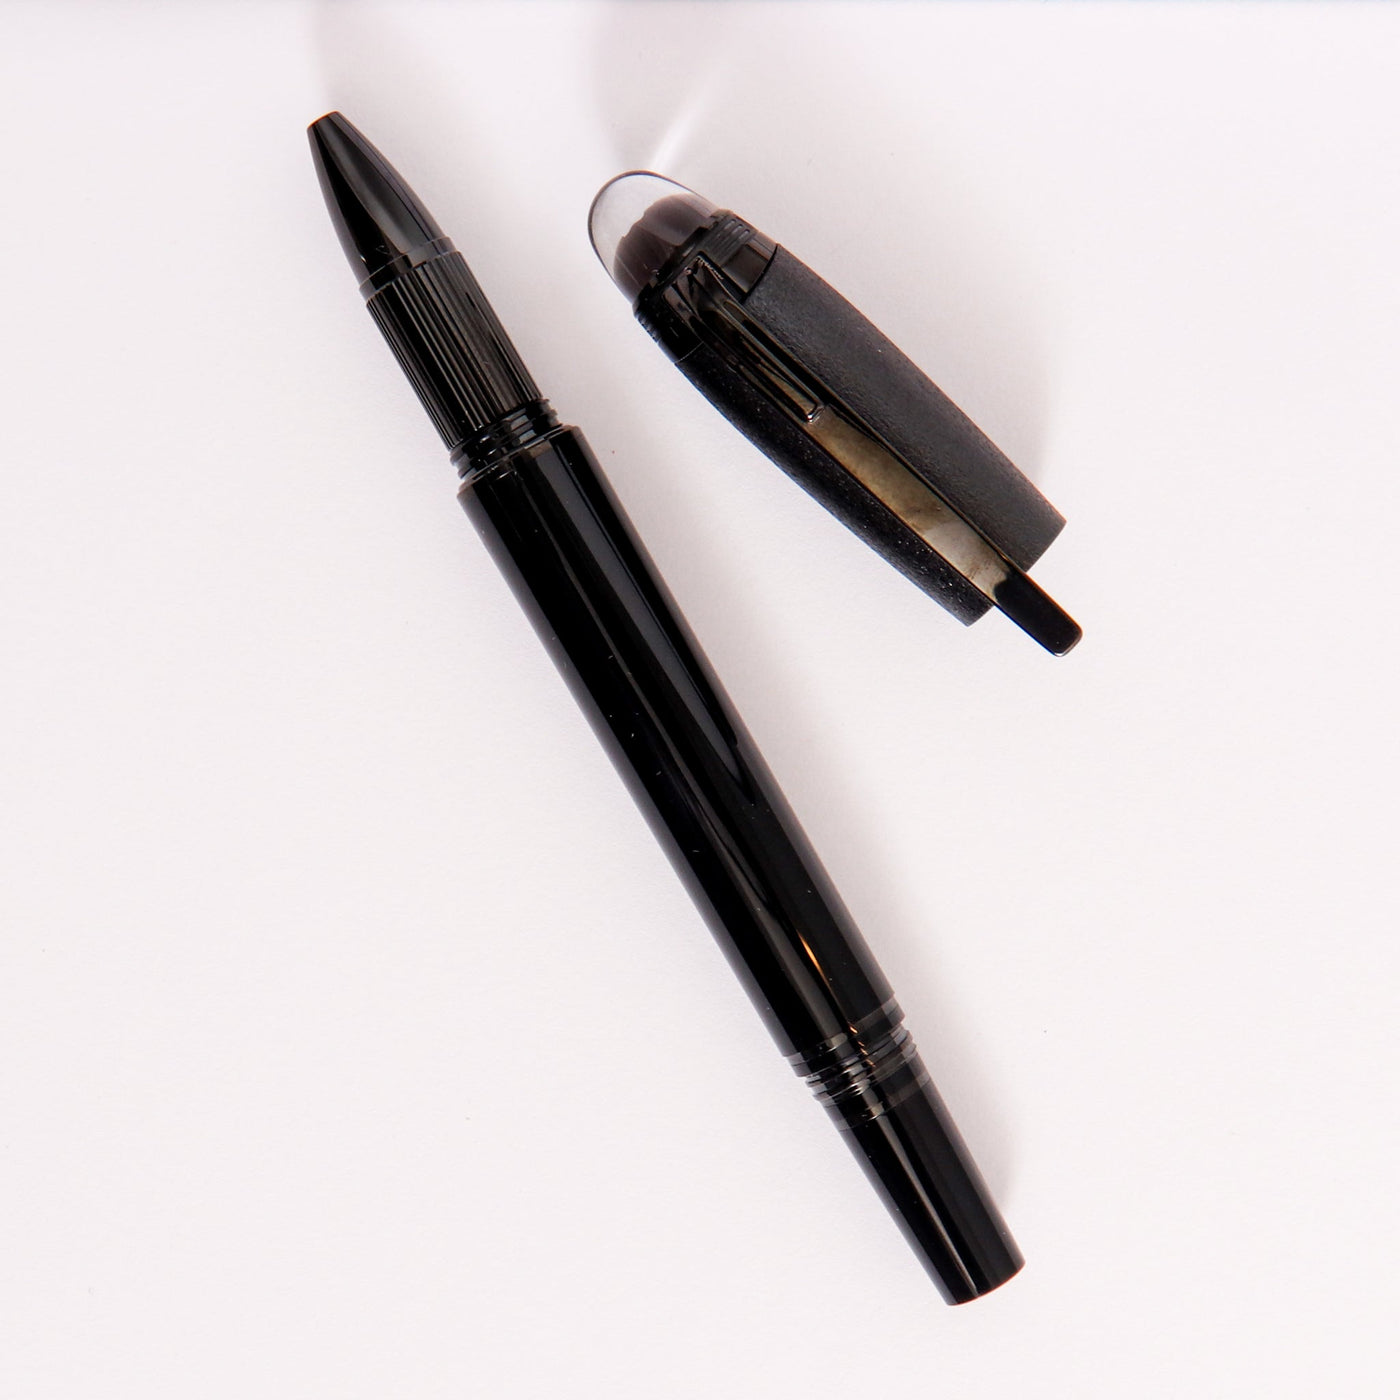 Montblanc-Starwalker-BlackCosmos-Doue-Rollerball-Fineliner-Pen-Coated-With-Black-PVD